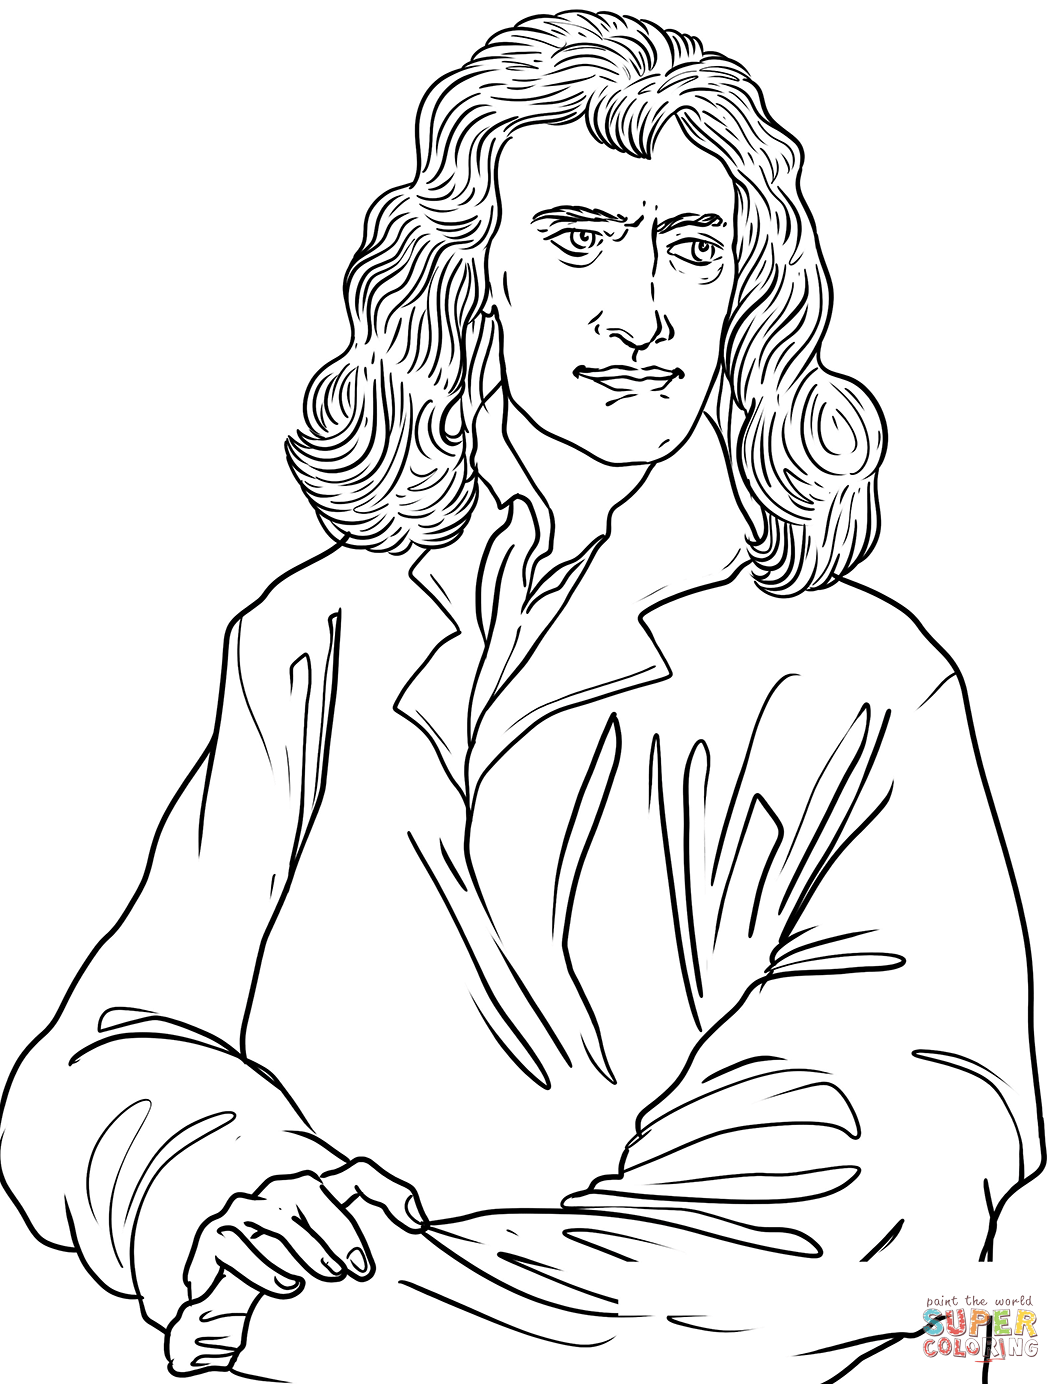 Isaac newton coloring page free printable coloring pages